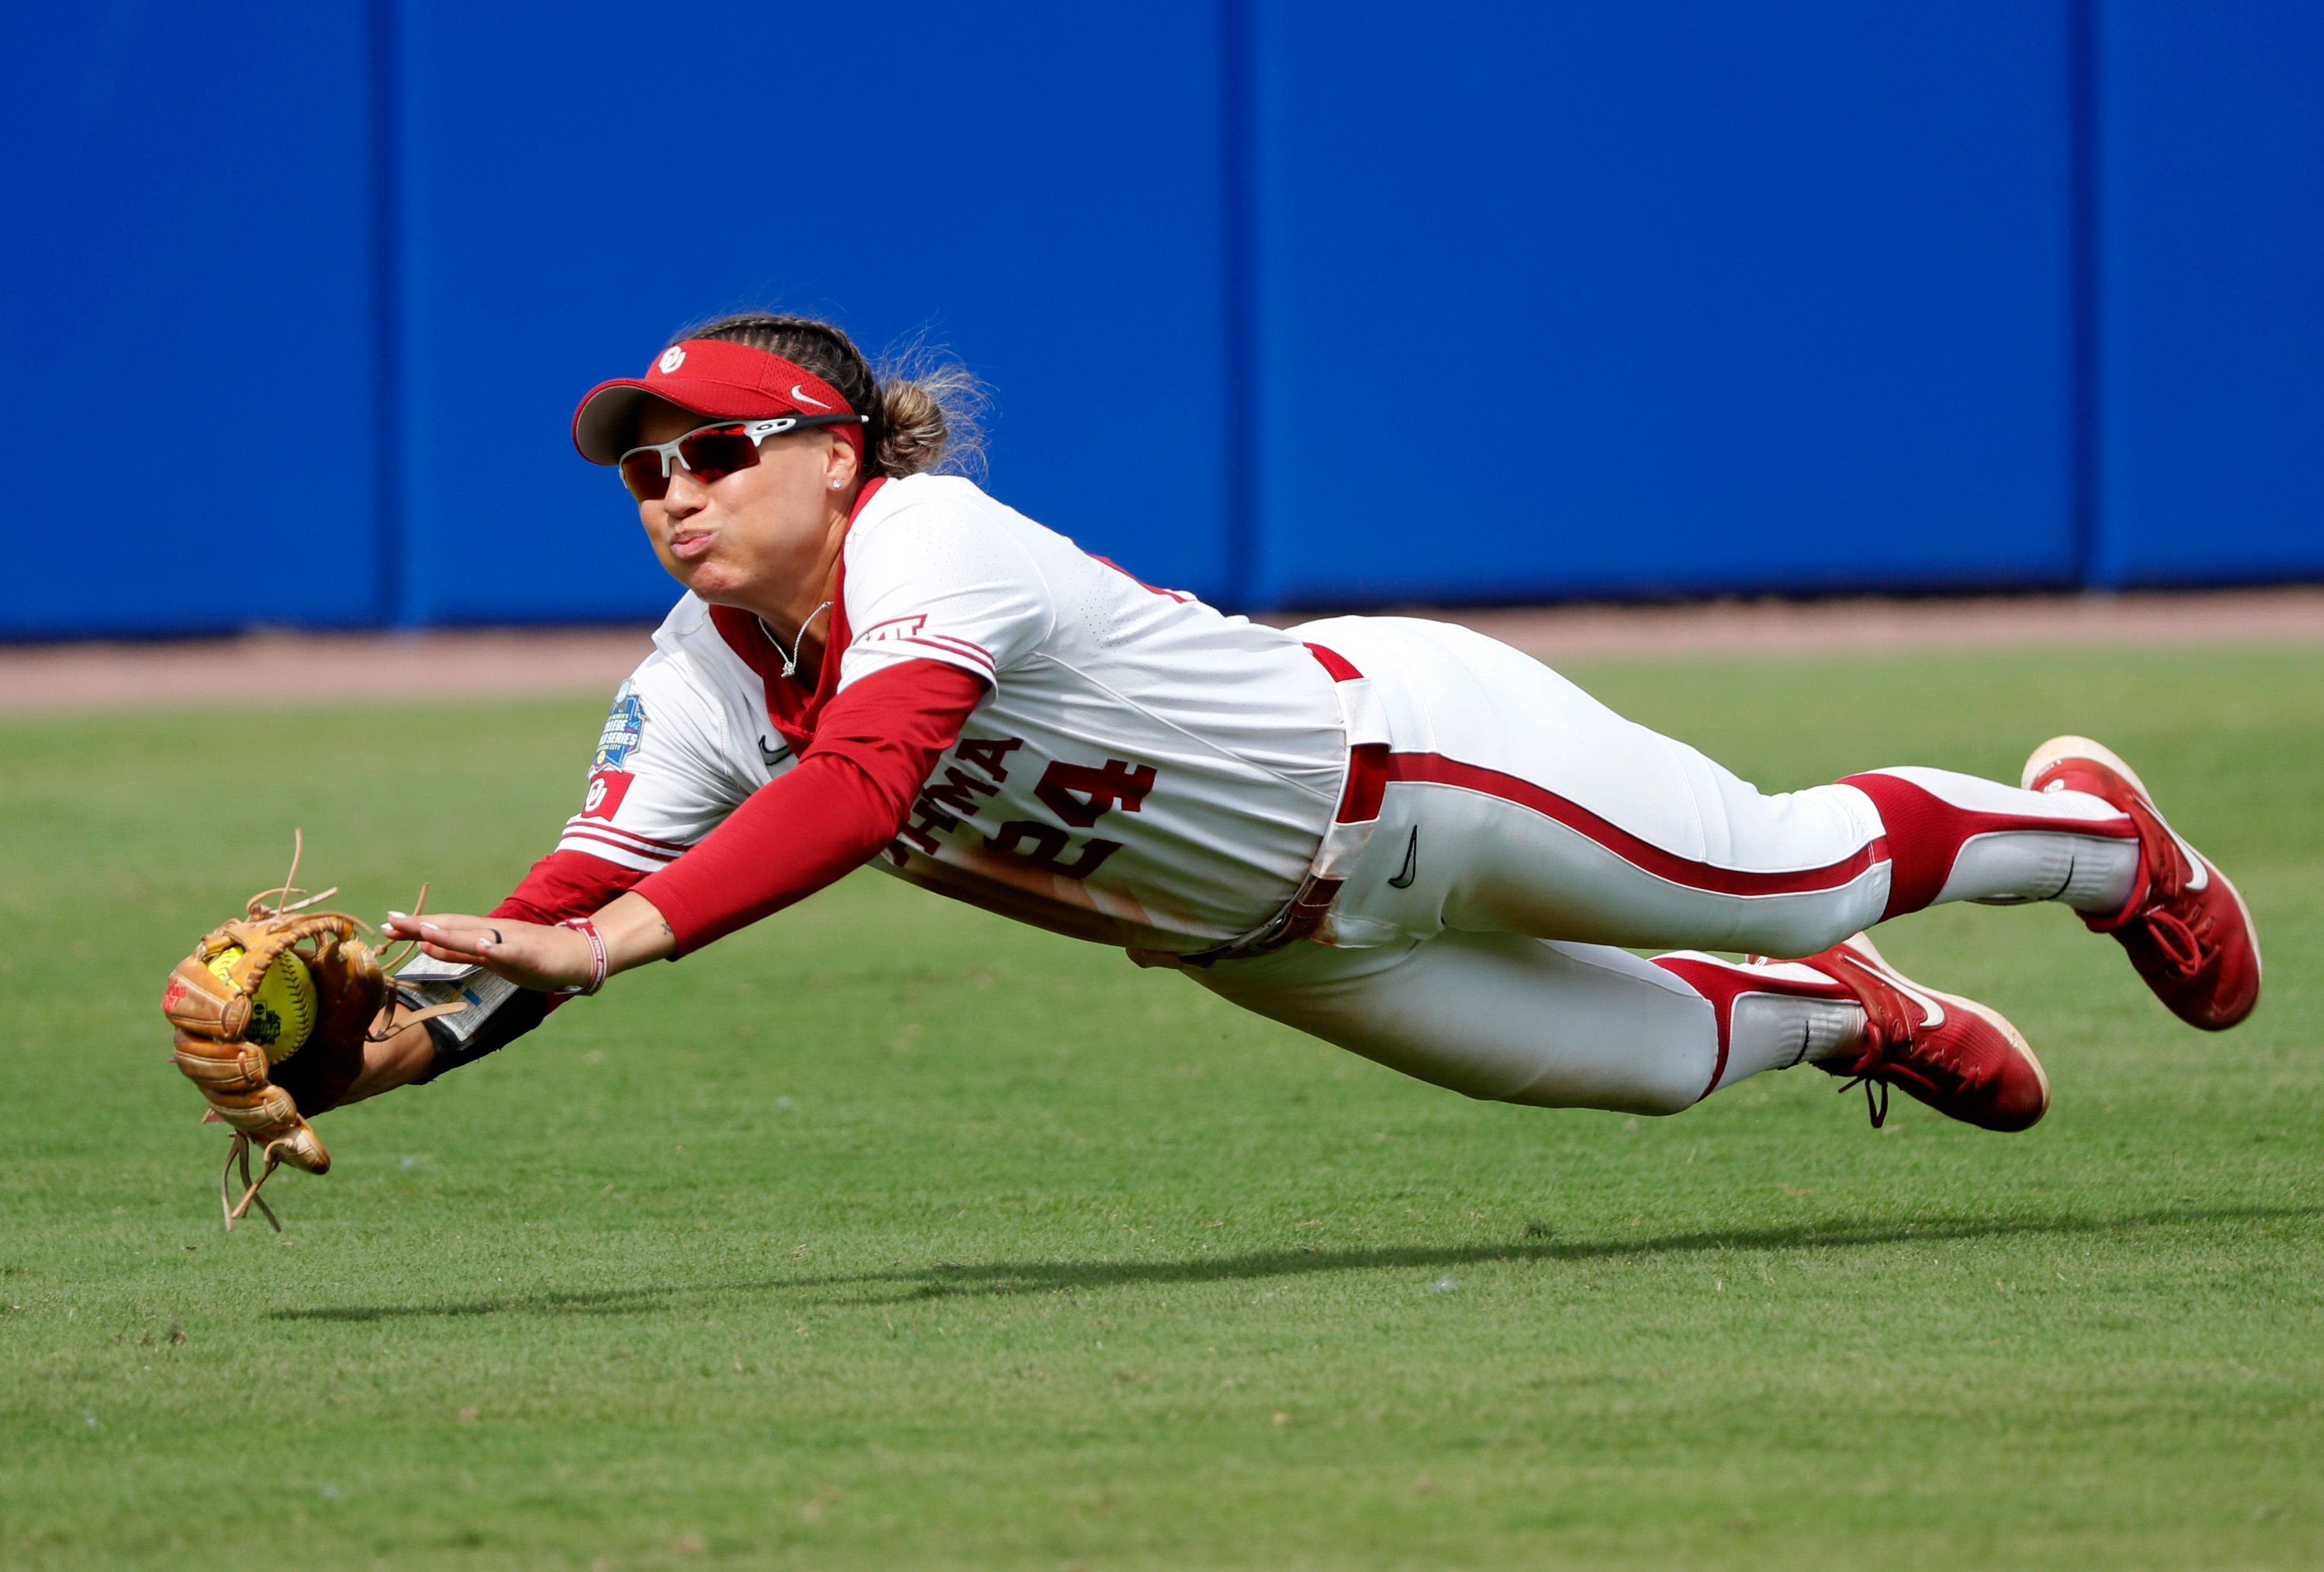 OU softball star Jayda Coleman's 'game-changing' heroics continue in WCWS vs Duke